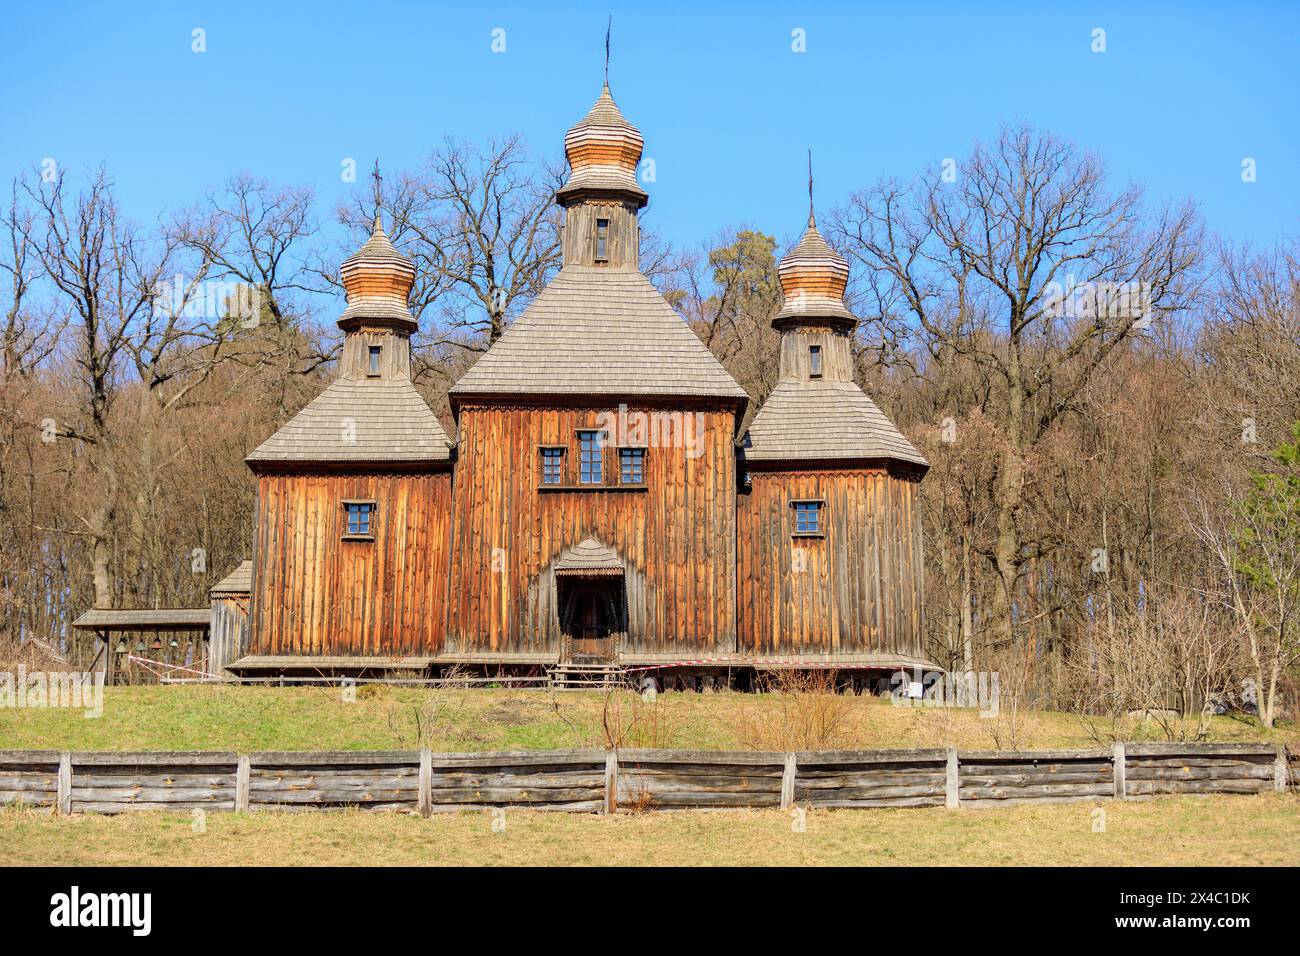 Ukraine, Kiev, Kyiv. Pyrohiv, also Pirogov, a village south of Kiev. Now home to an outdoor Museum of Folk Architecture and Life of Ukraine. Wooden church. Stock Photo